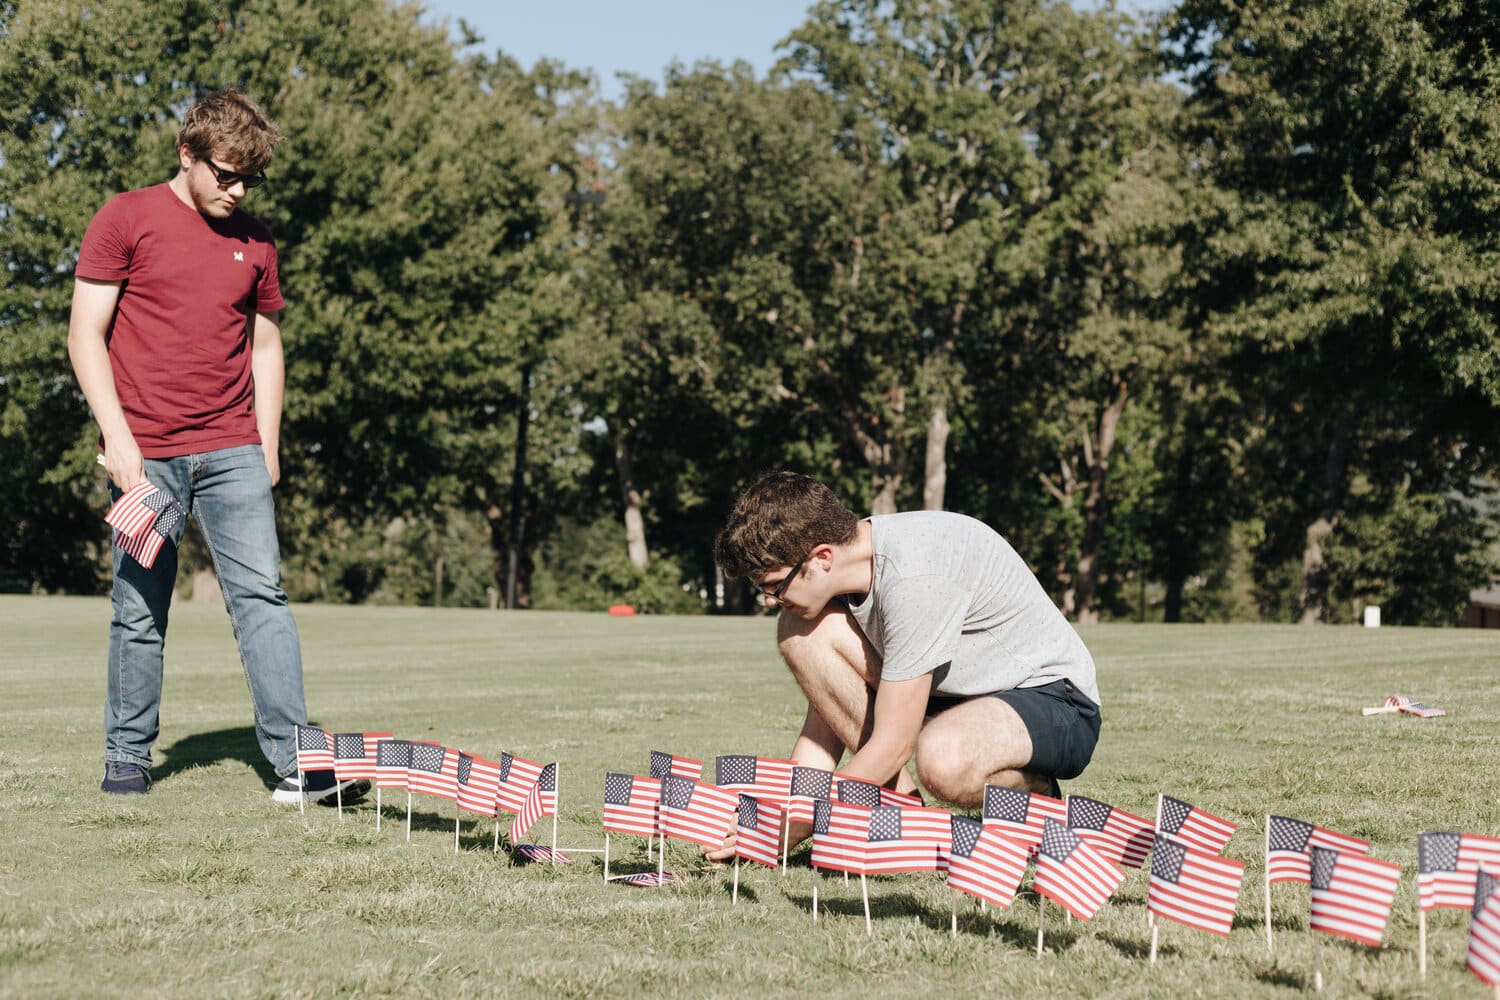 Senior John Barham and freshman Cyrus Stratton are also working on putting out flags to honor lives lost in 9/11.